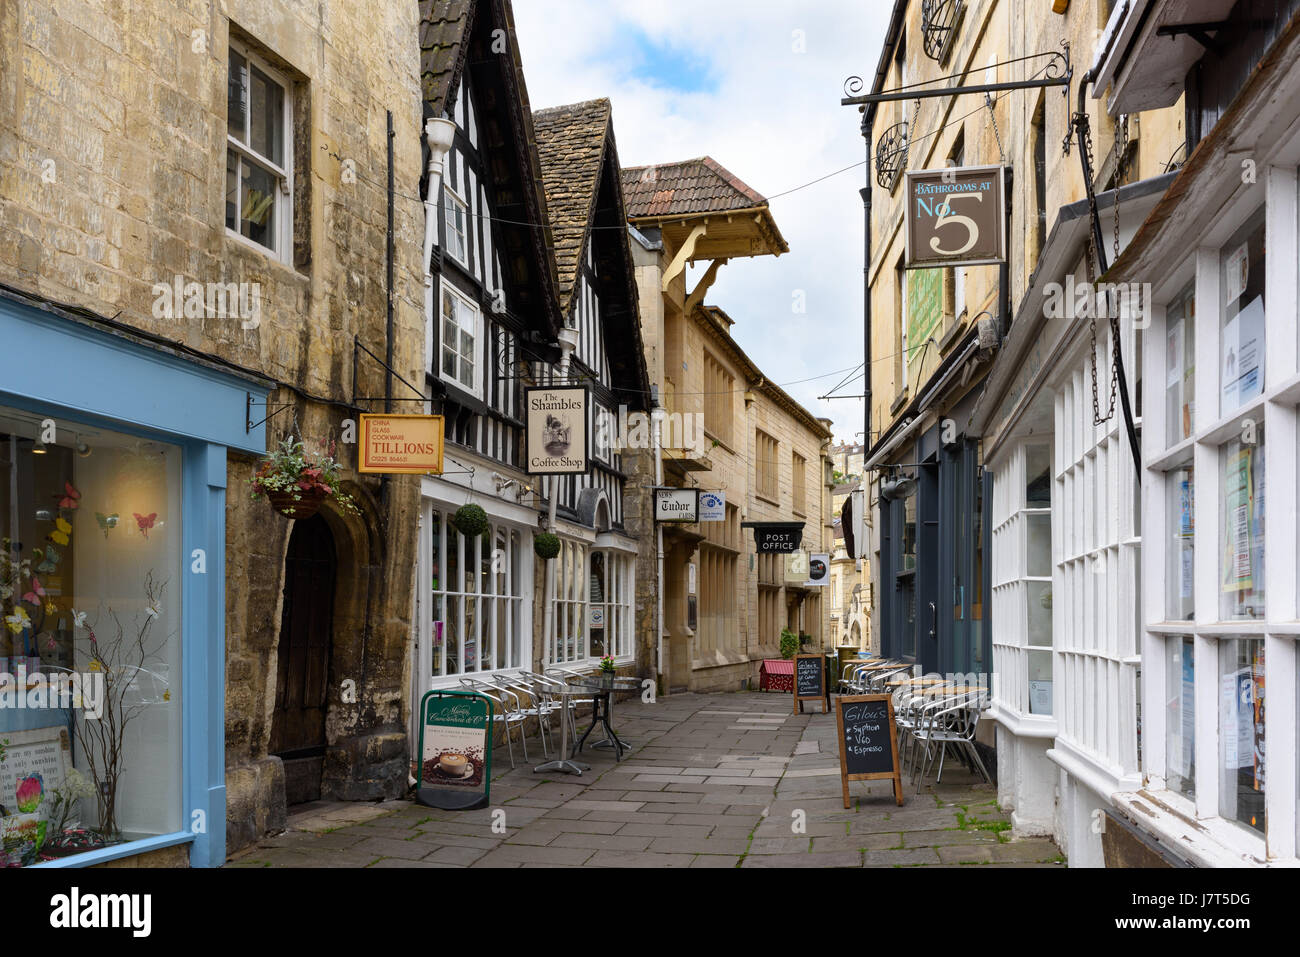 The Shambles in the historic town of Bradford on Avon, Wiltshire, England. Stock Photo